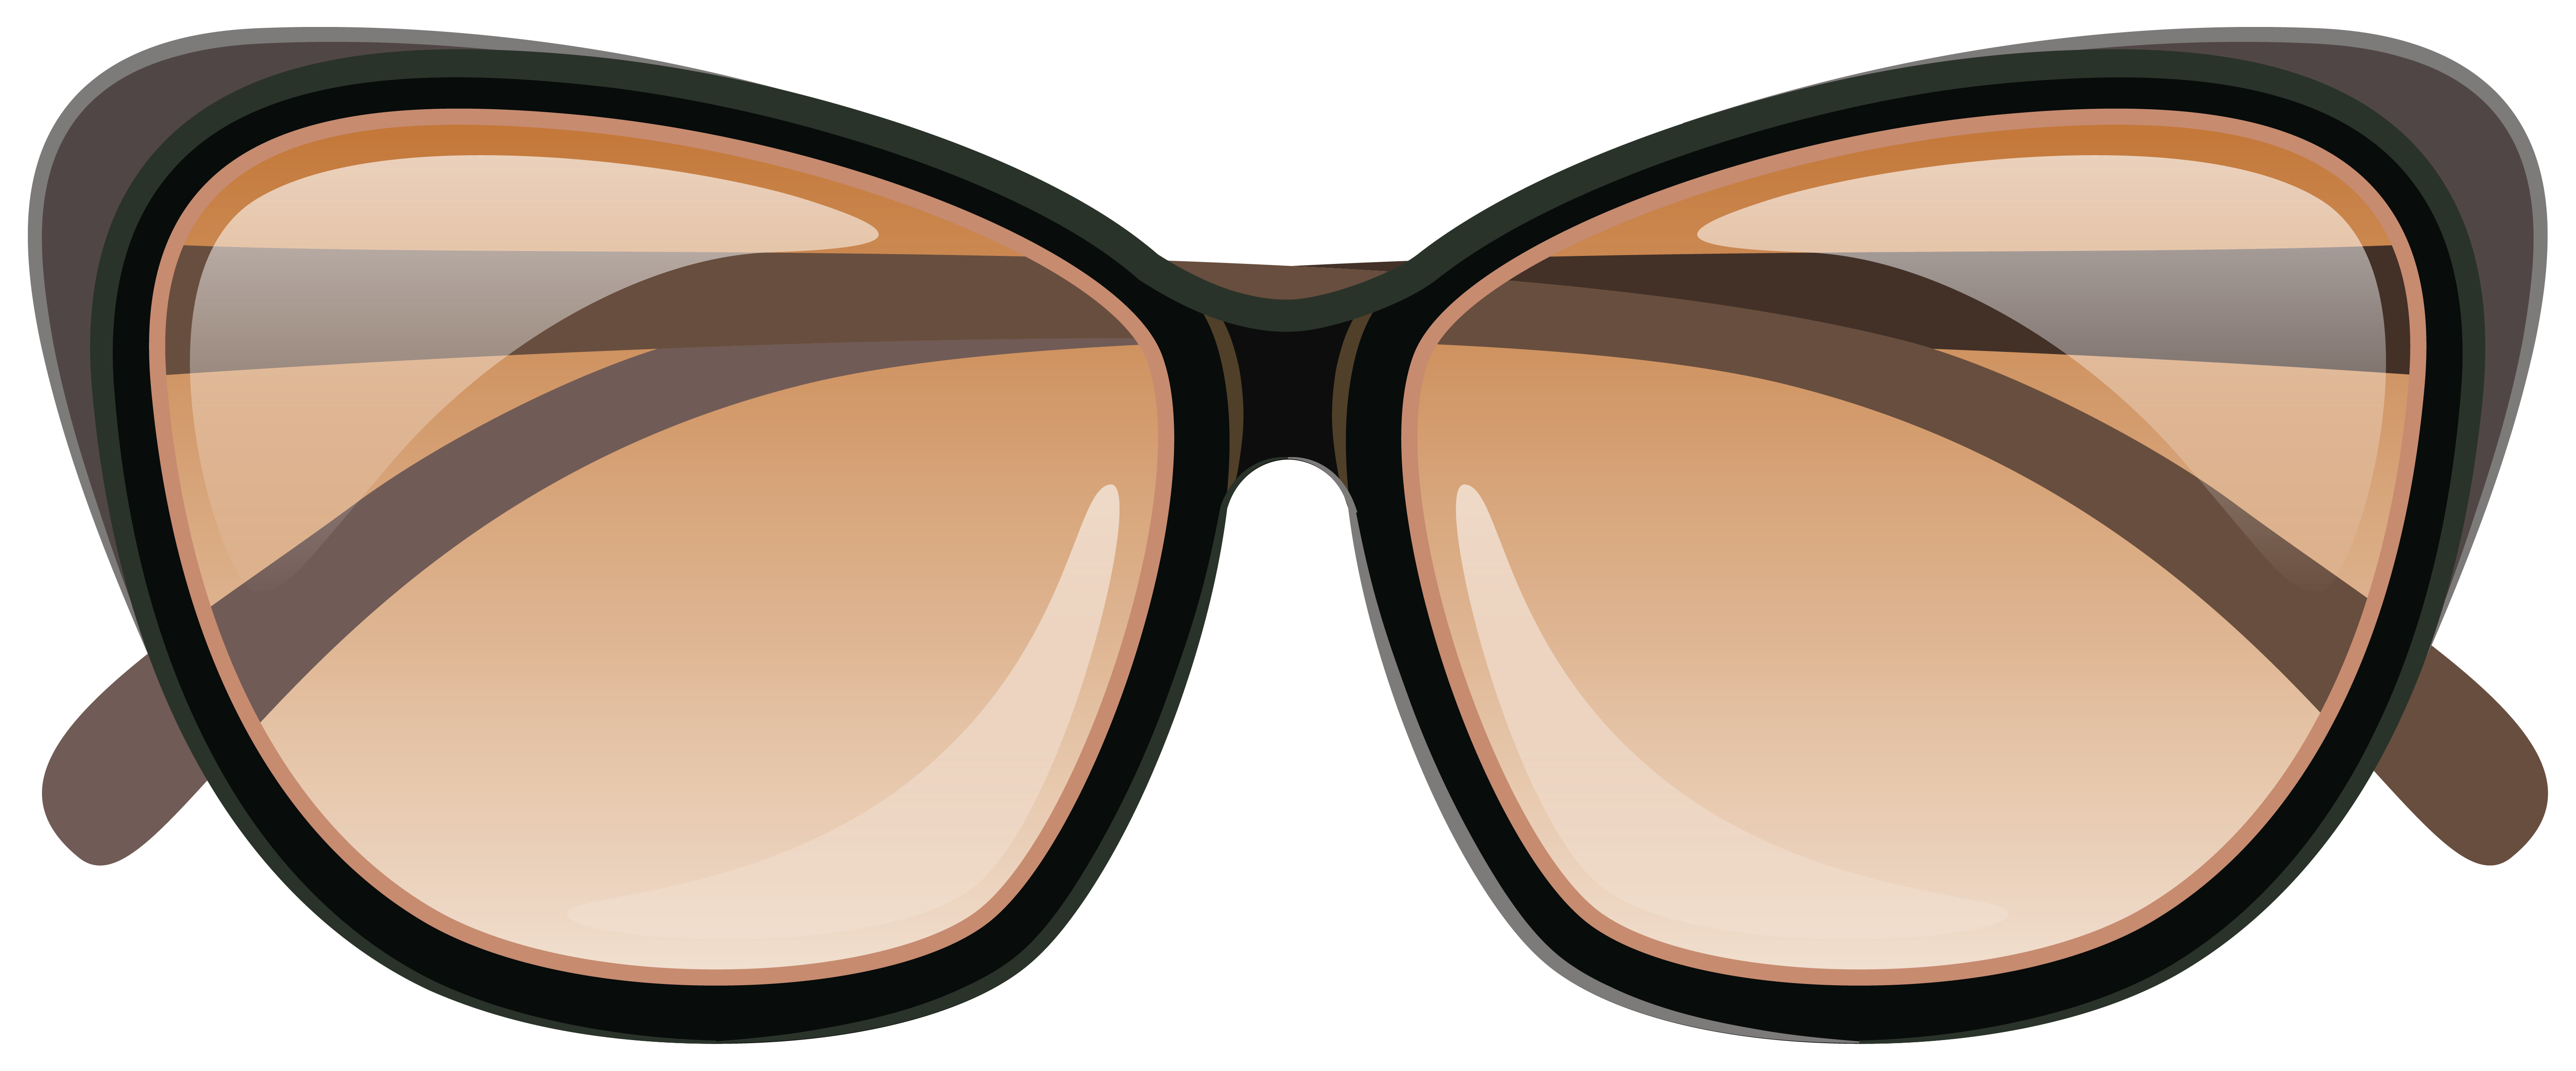 Brown png image gallery. Female clipart sunglasses